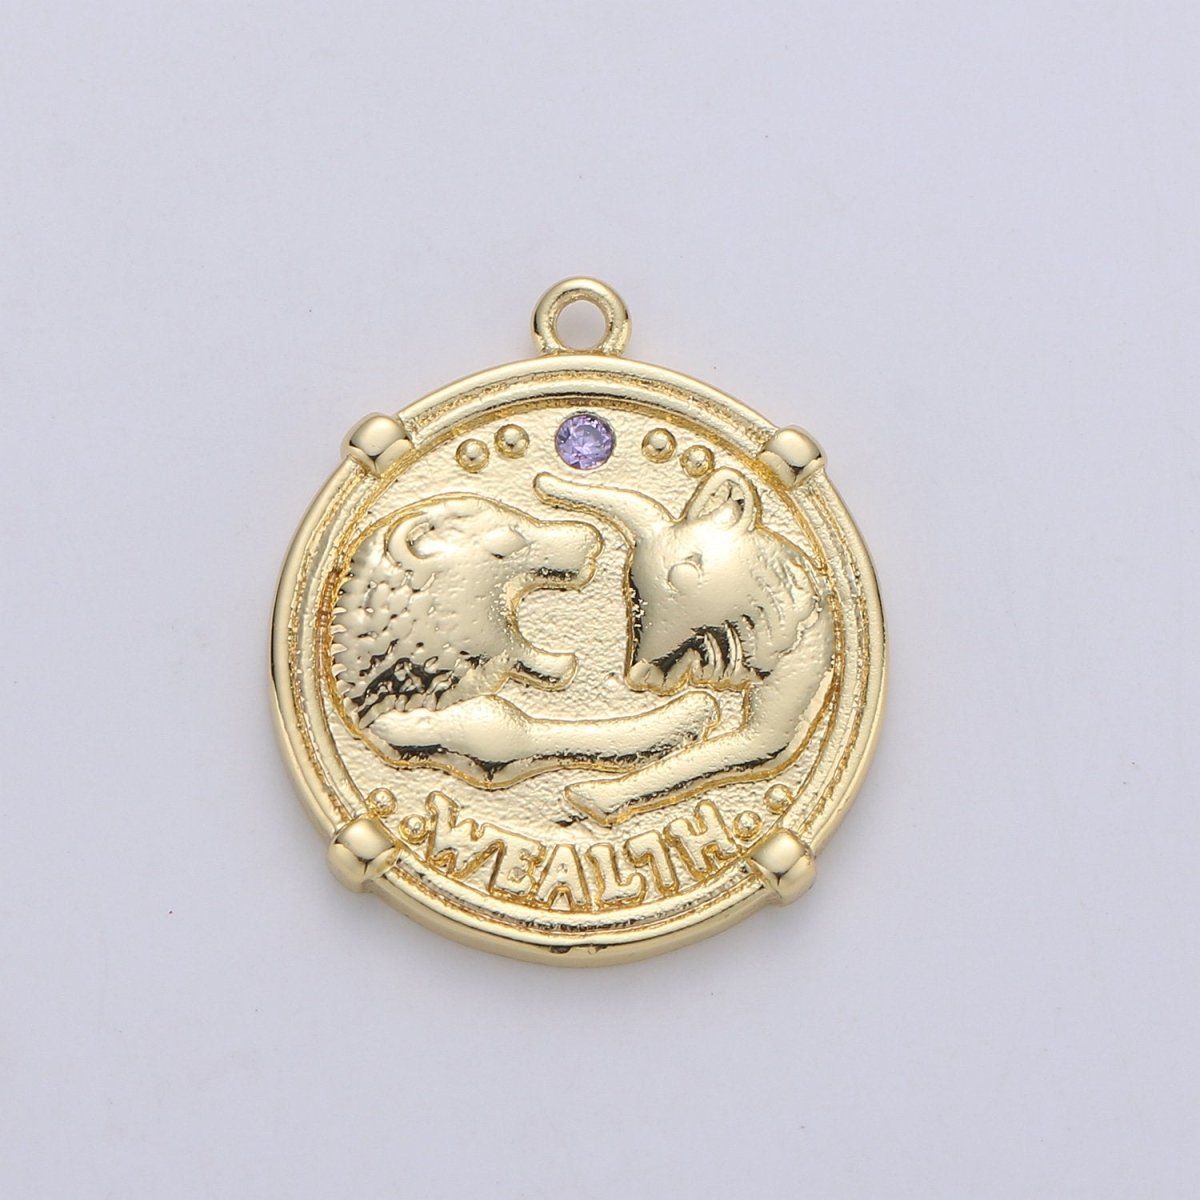 24K Gold Filled Wealth Strong Lion Dainty Charm with Micro Pave Lavender or Green Cubic Zirconia CZ Stone for Necklace or Bracelet, C-868 - DLUXCA